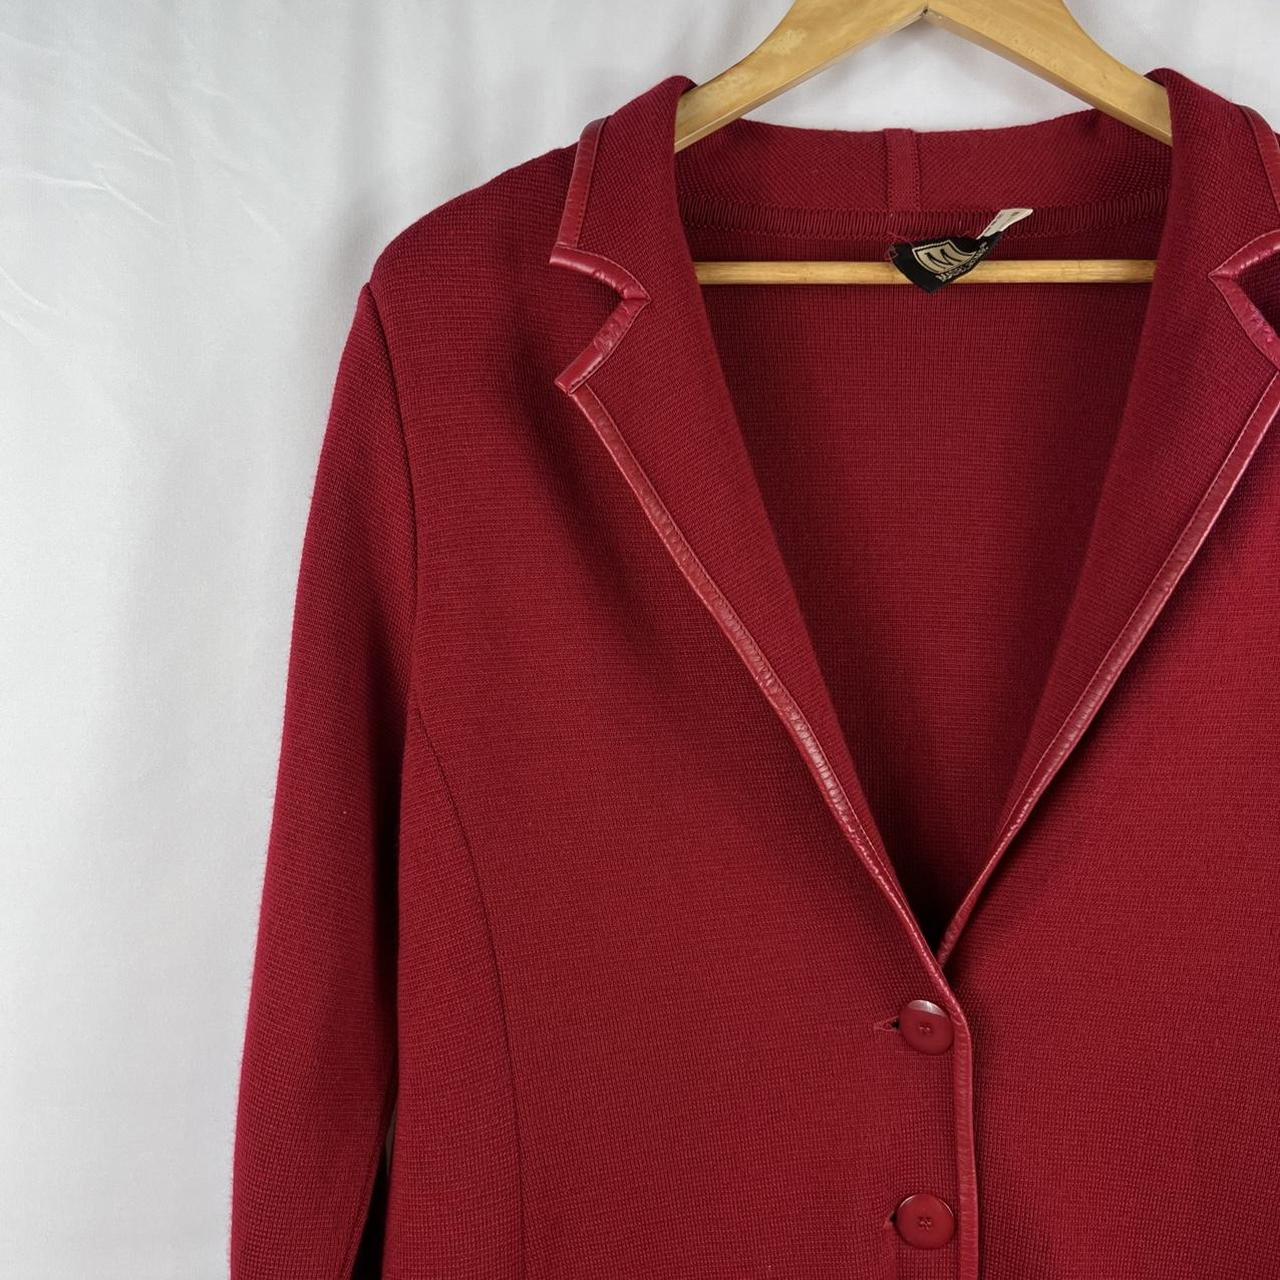 Vintage 90s Thick Knit Wine Red Blazer with Leather... - Depop